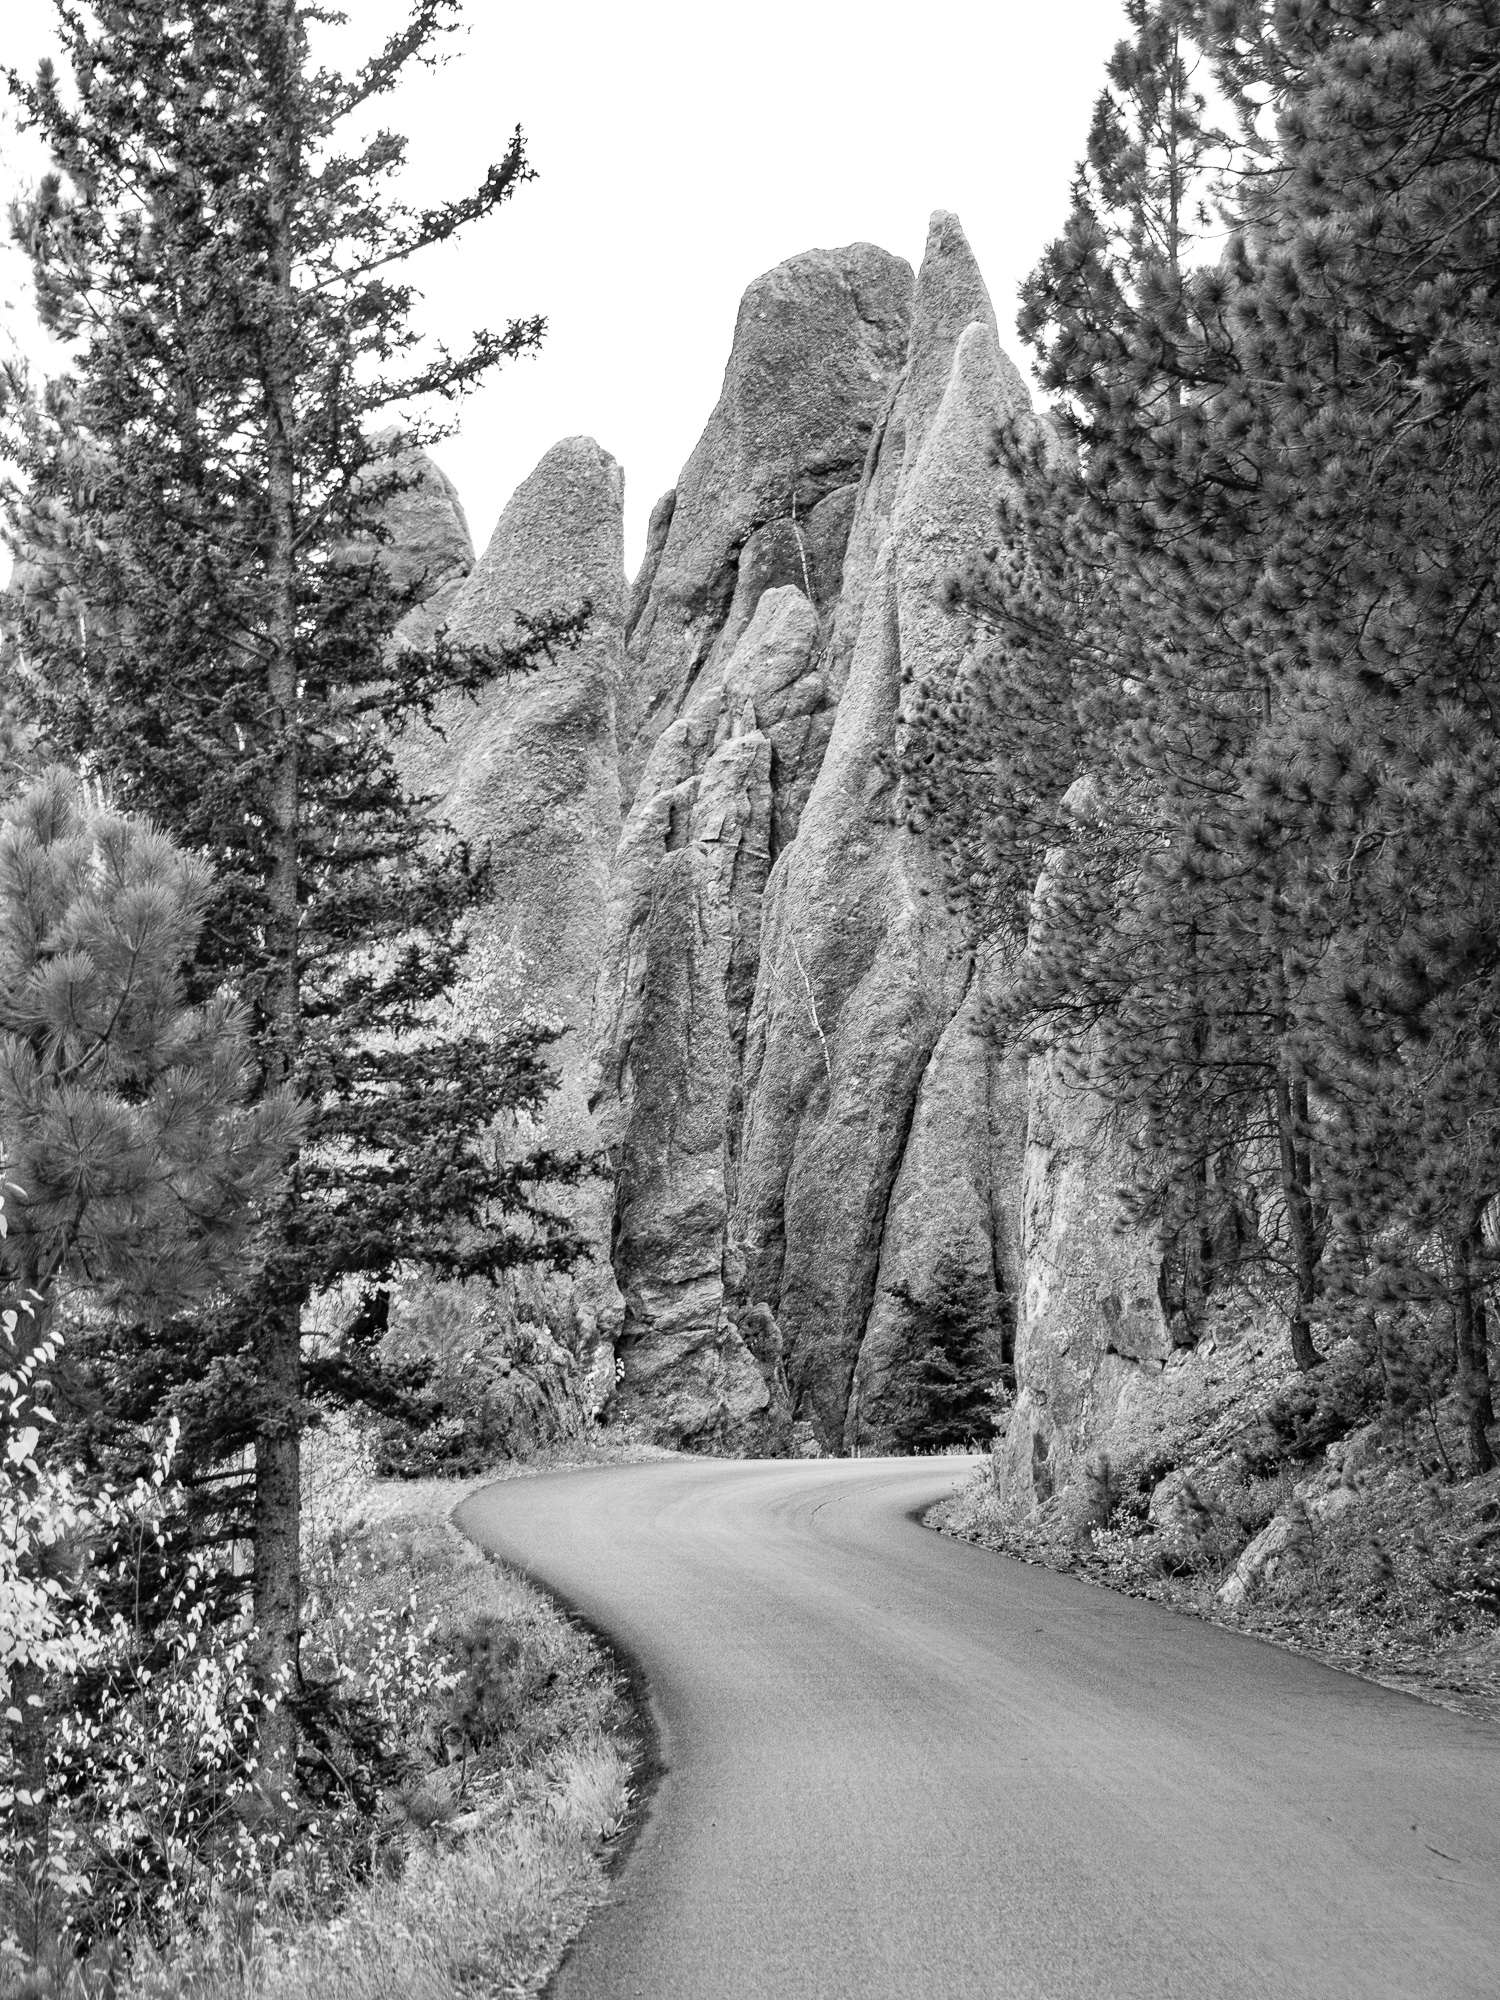 Along the Needles Highway.